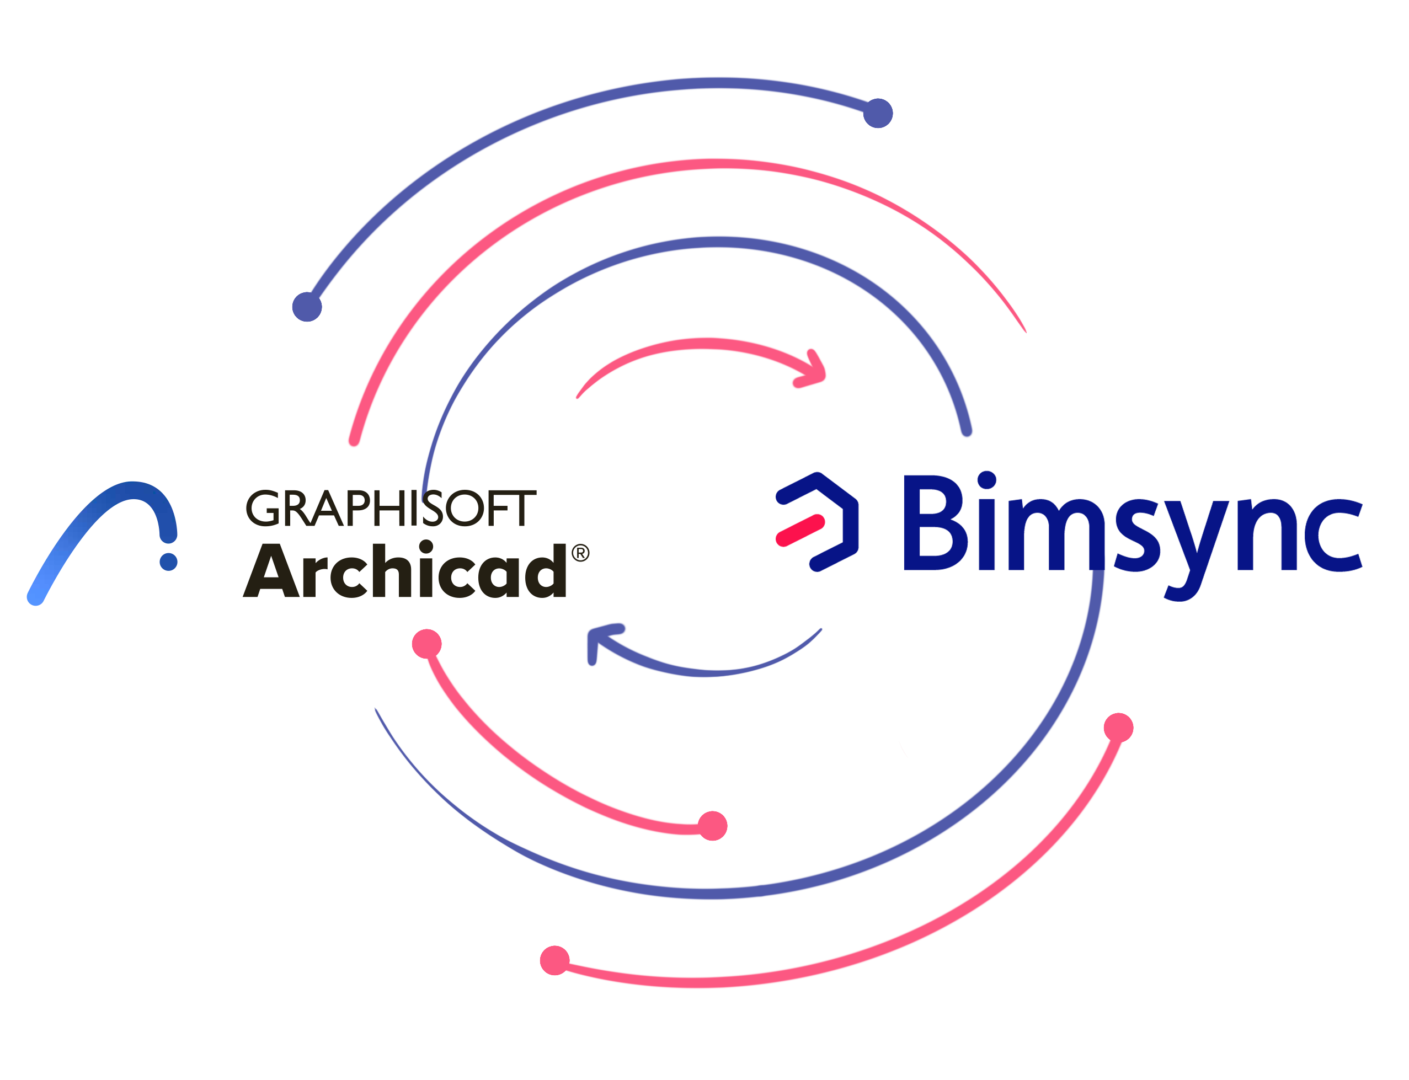 Bimsync logo (now Catenda) combined with Archicad